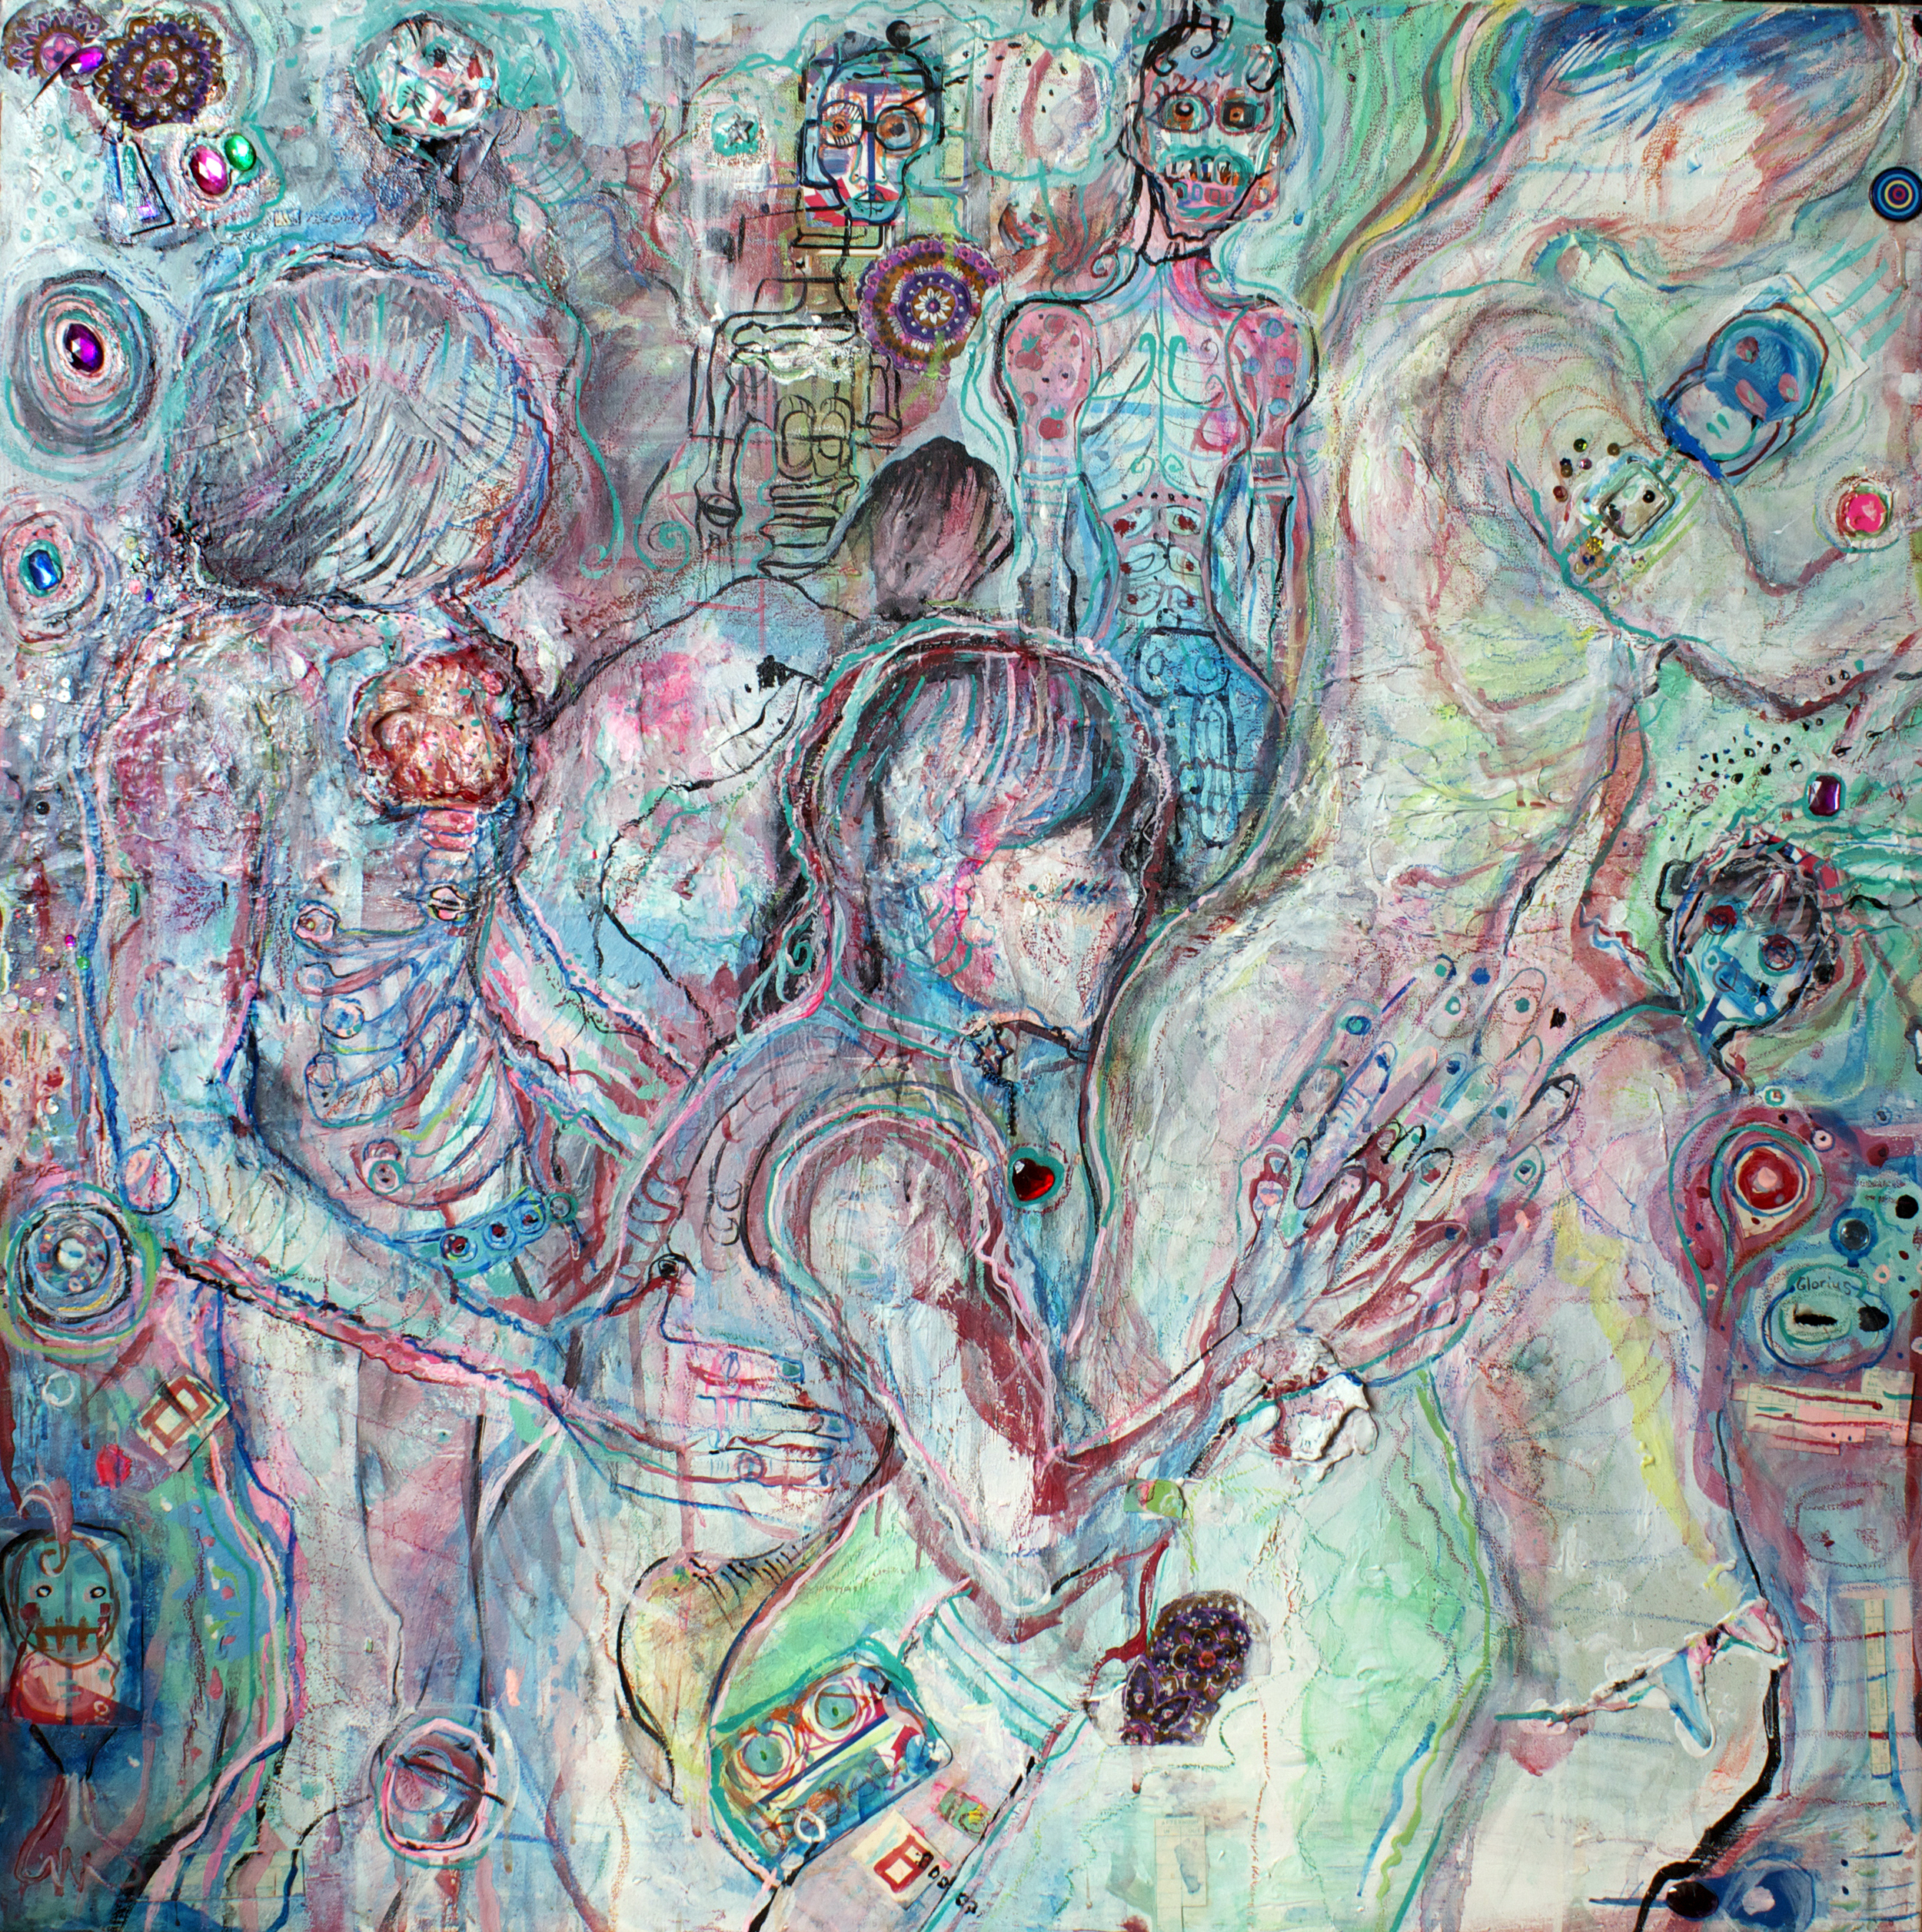 Stahlrohr, mixed media on canvas, 3x3ft, 2007